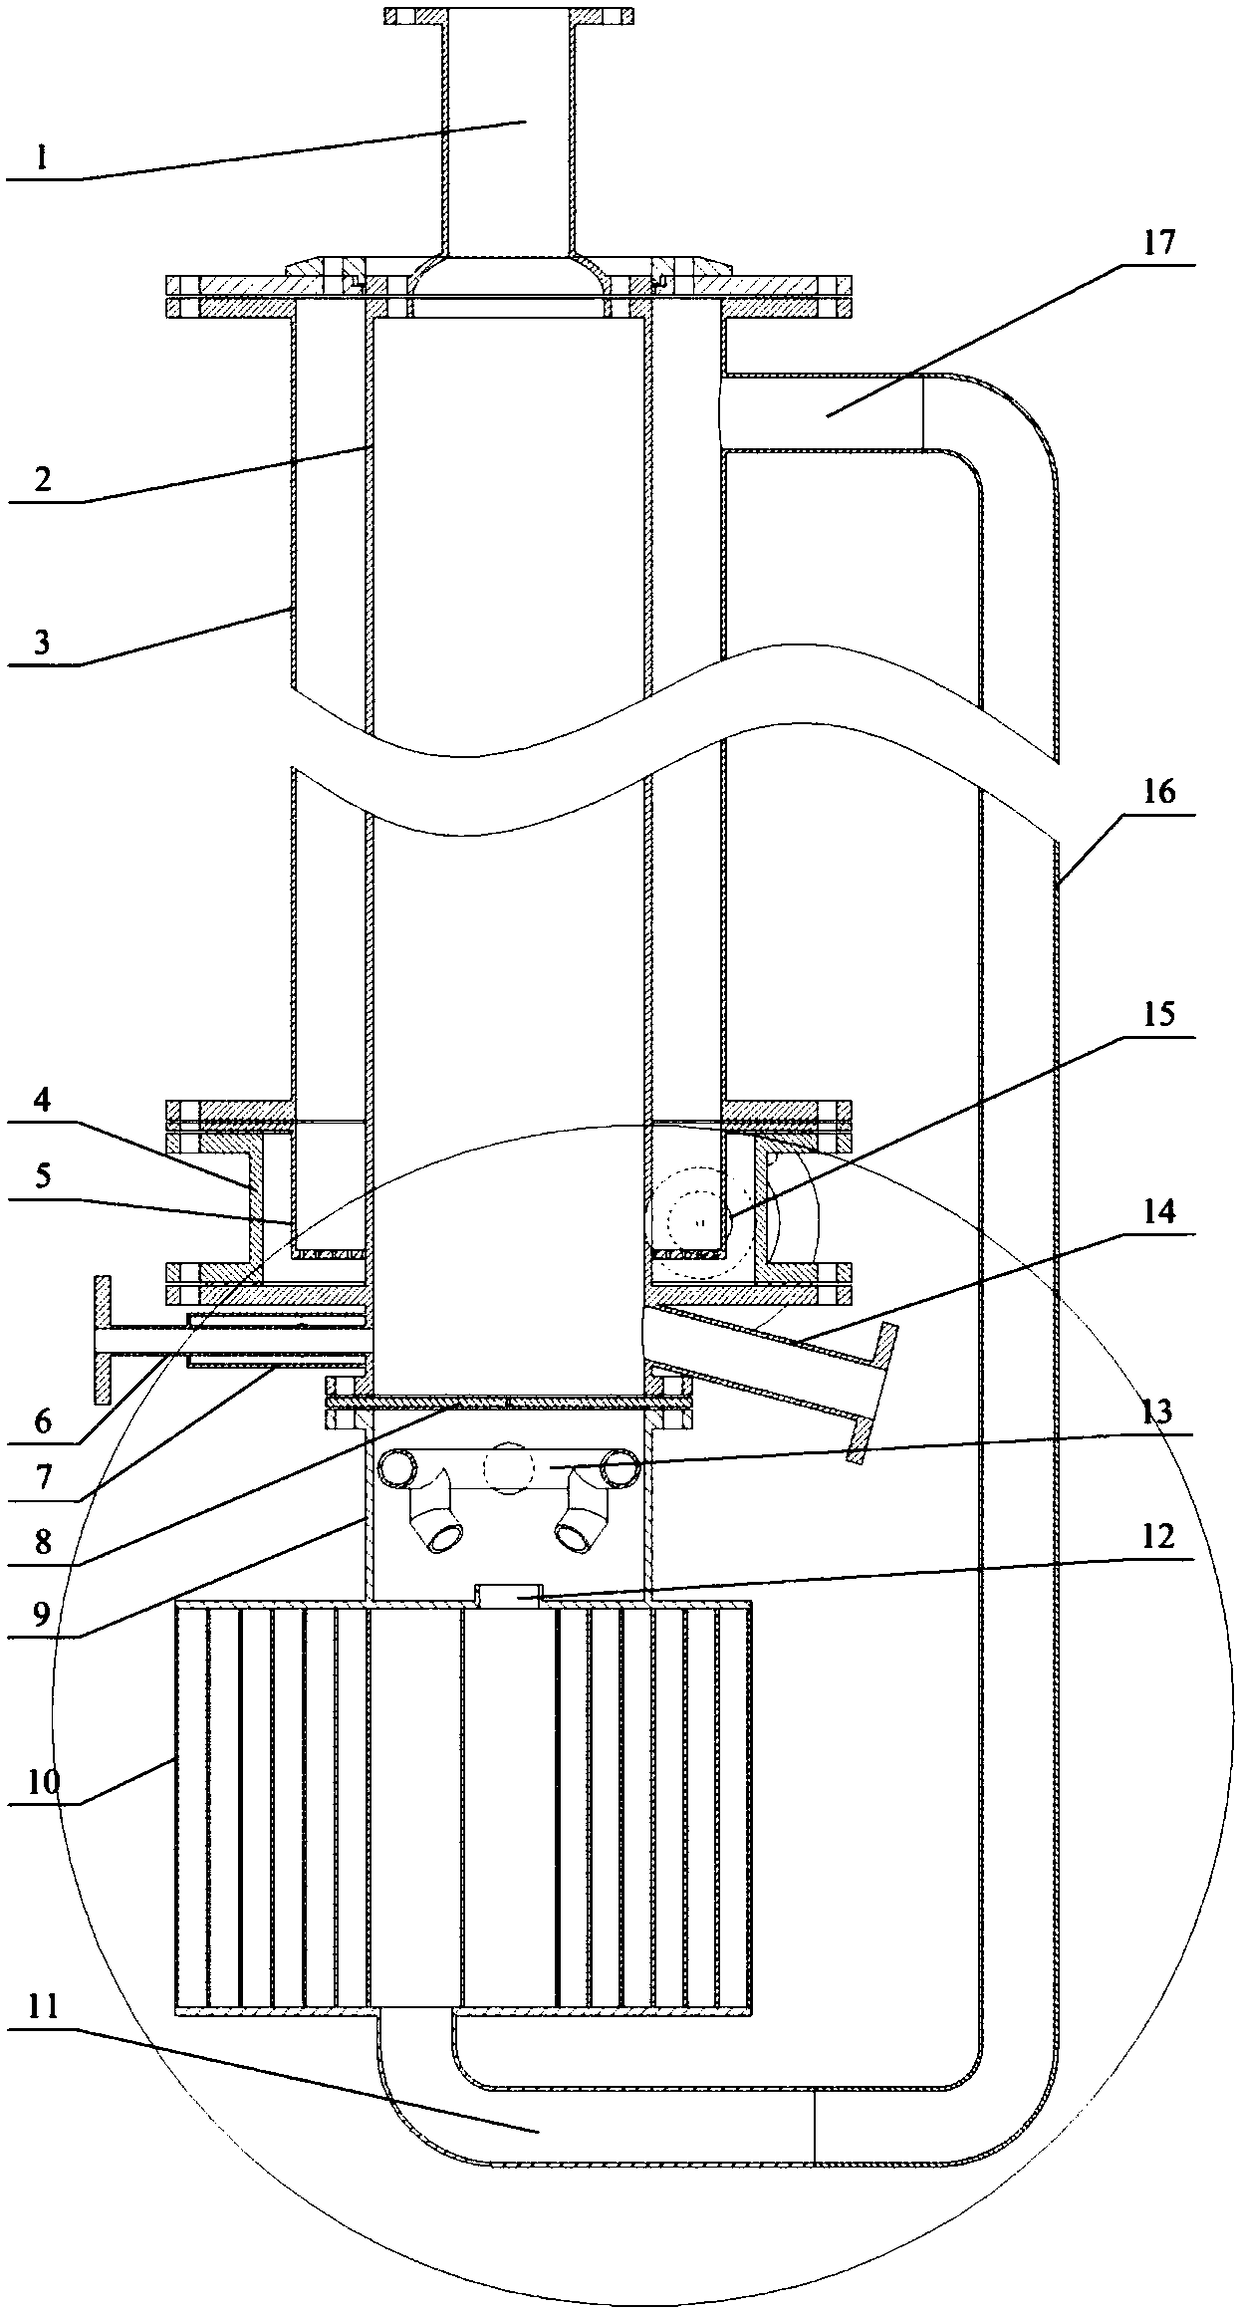 A casing type double-sided fluidized bed rapid pyrolysis device